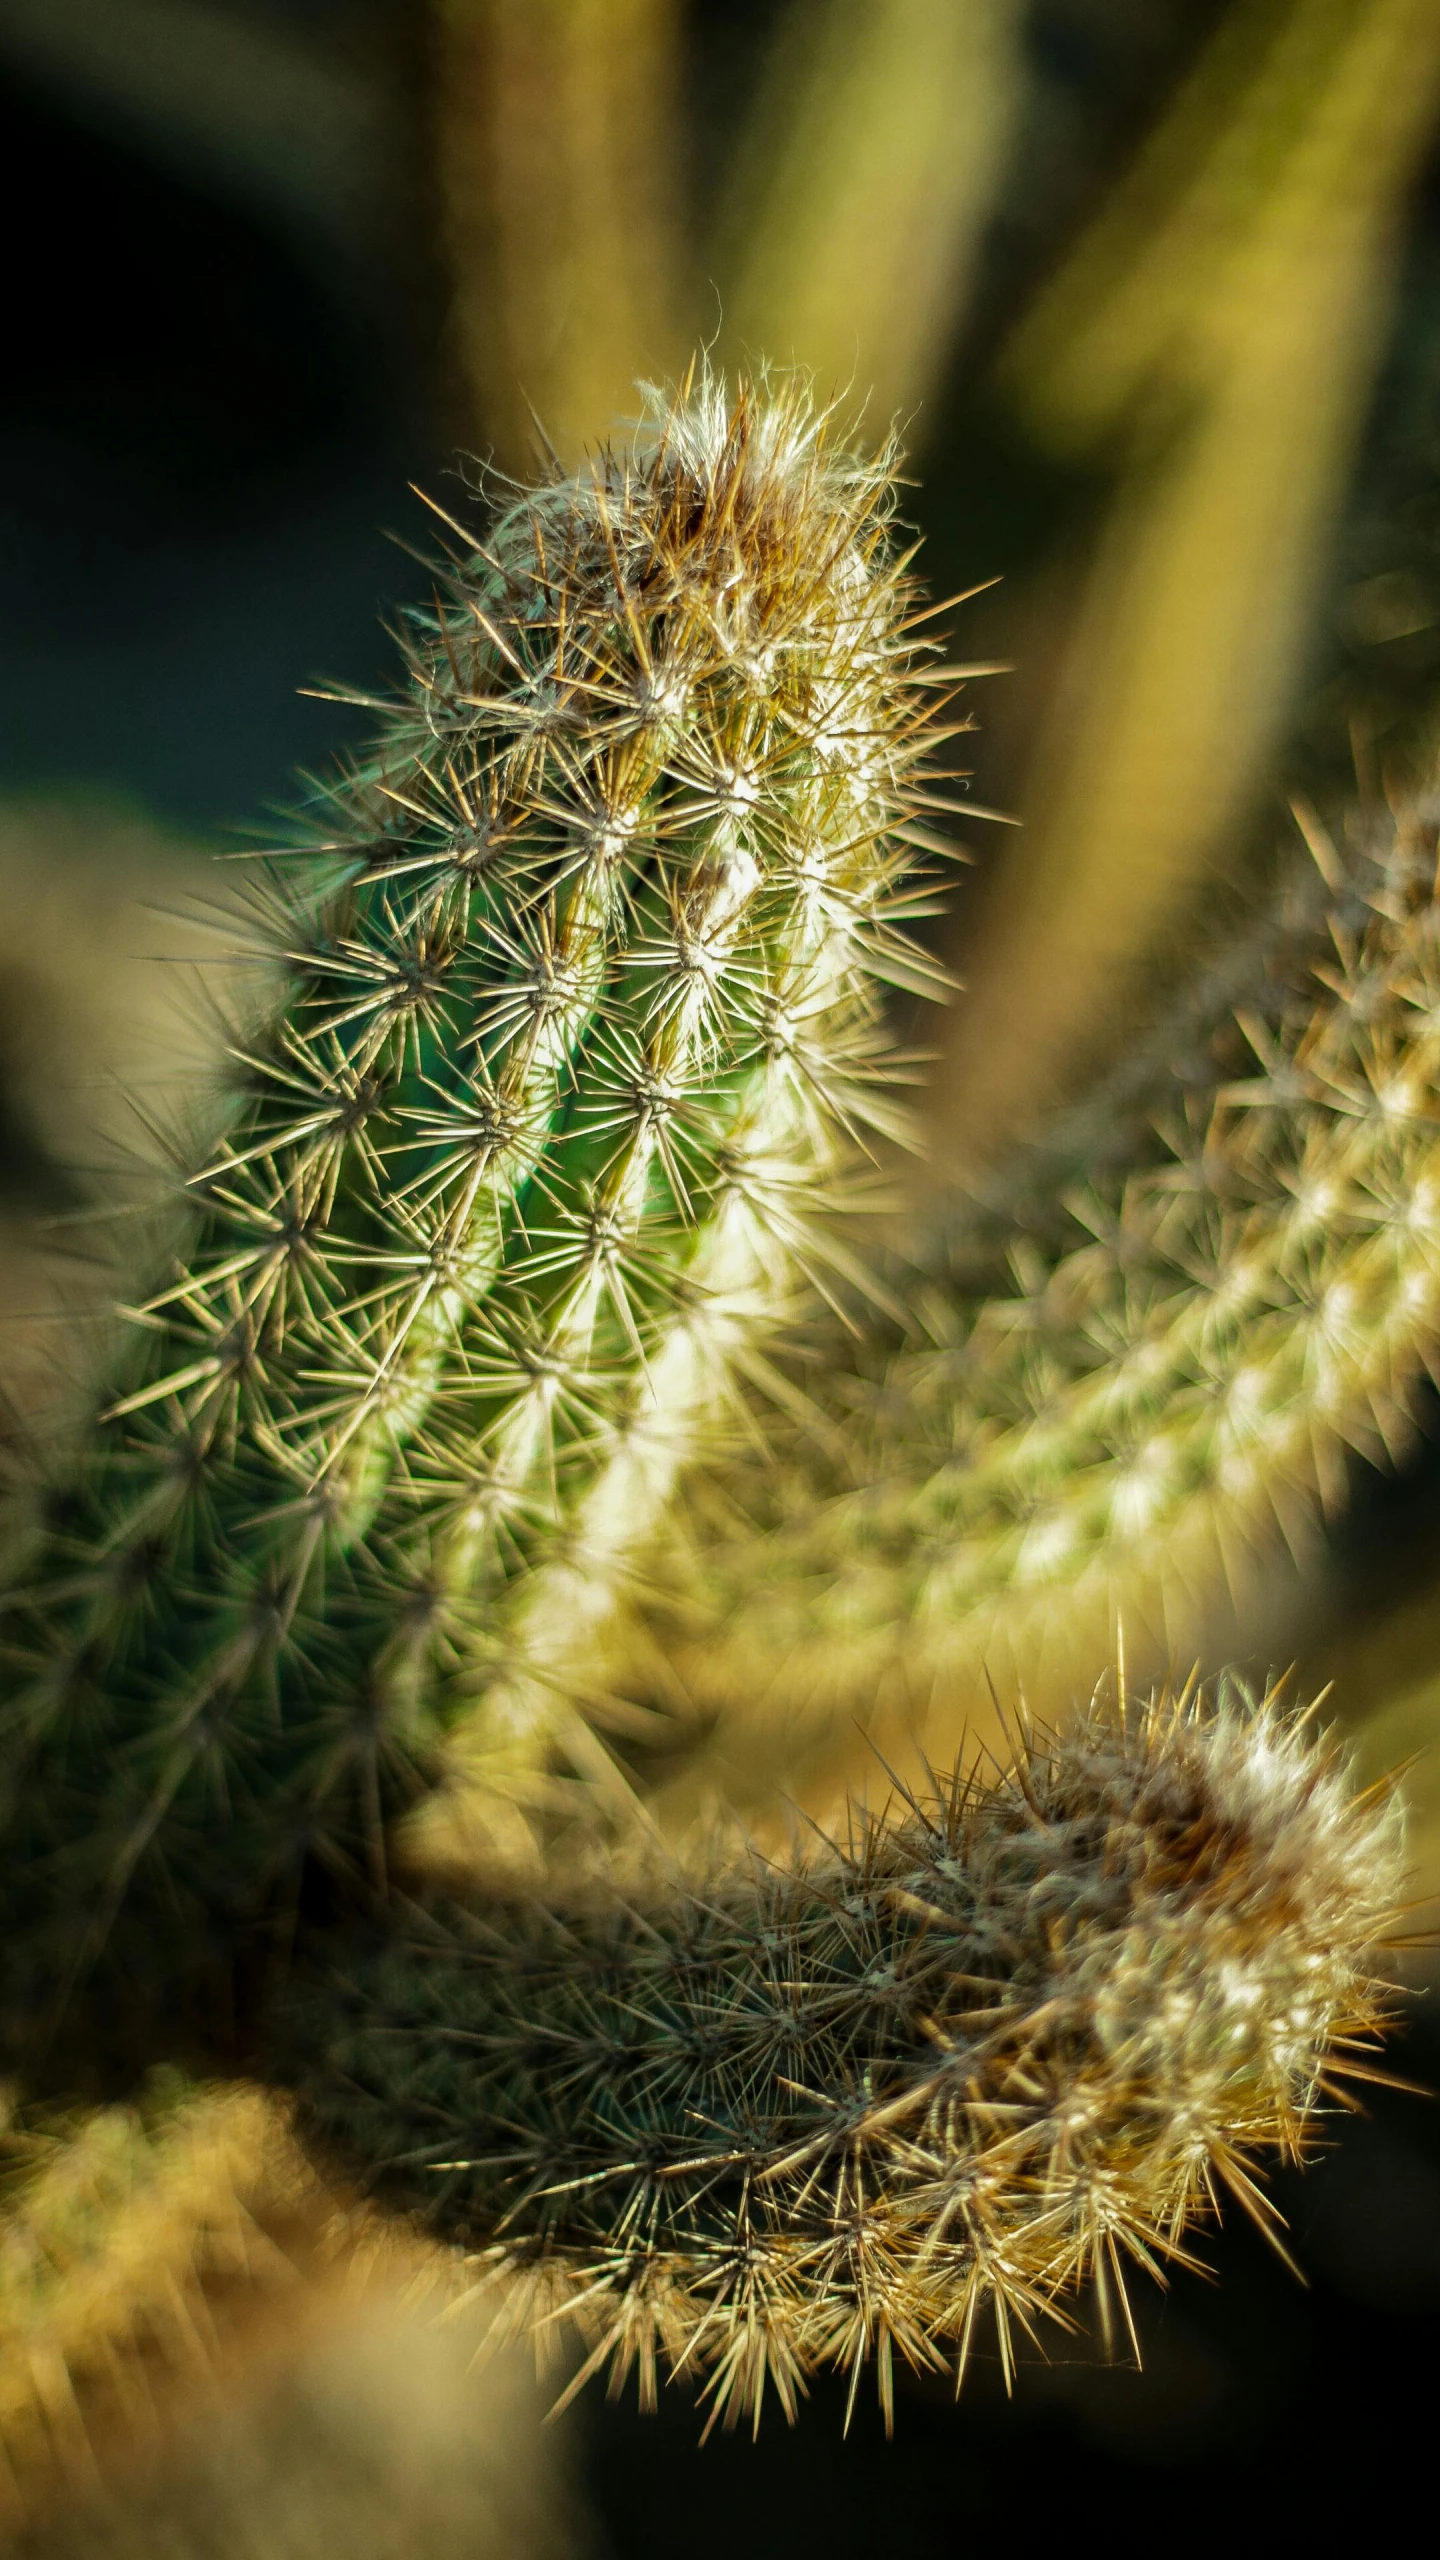 a small cactus with large needles and tiny spiky spines